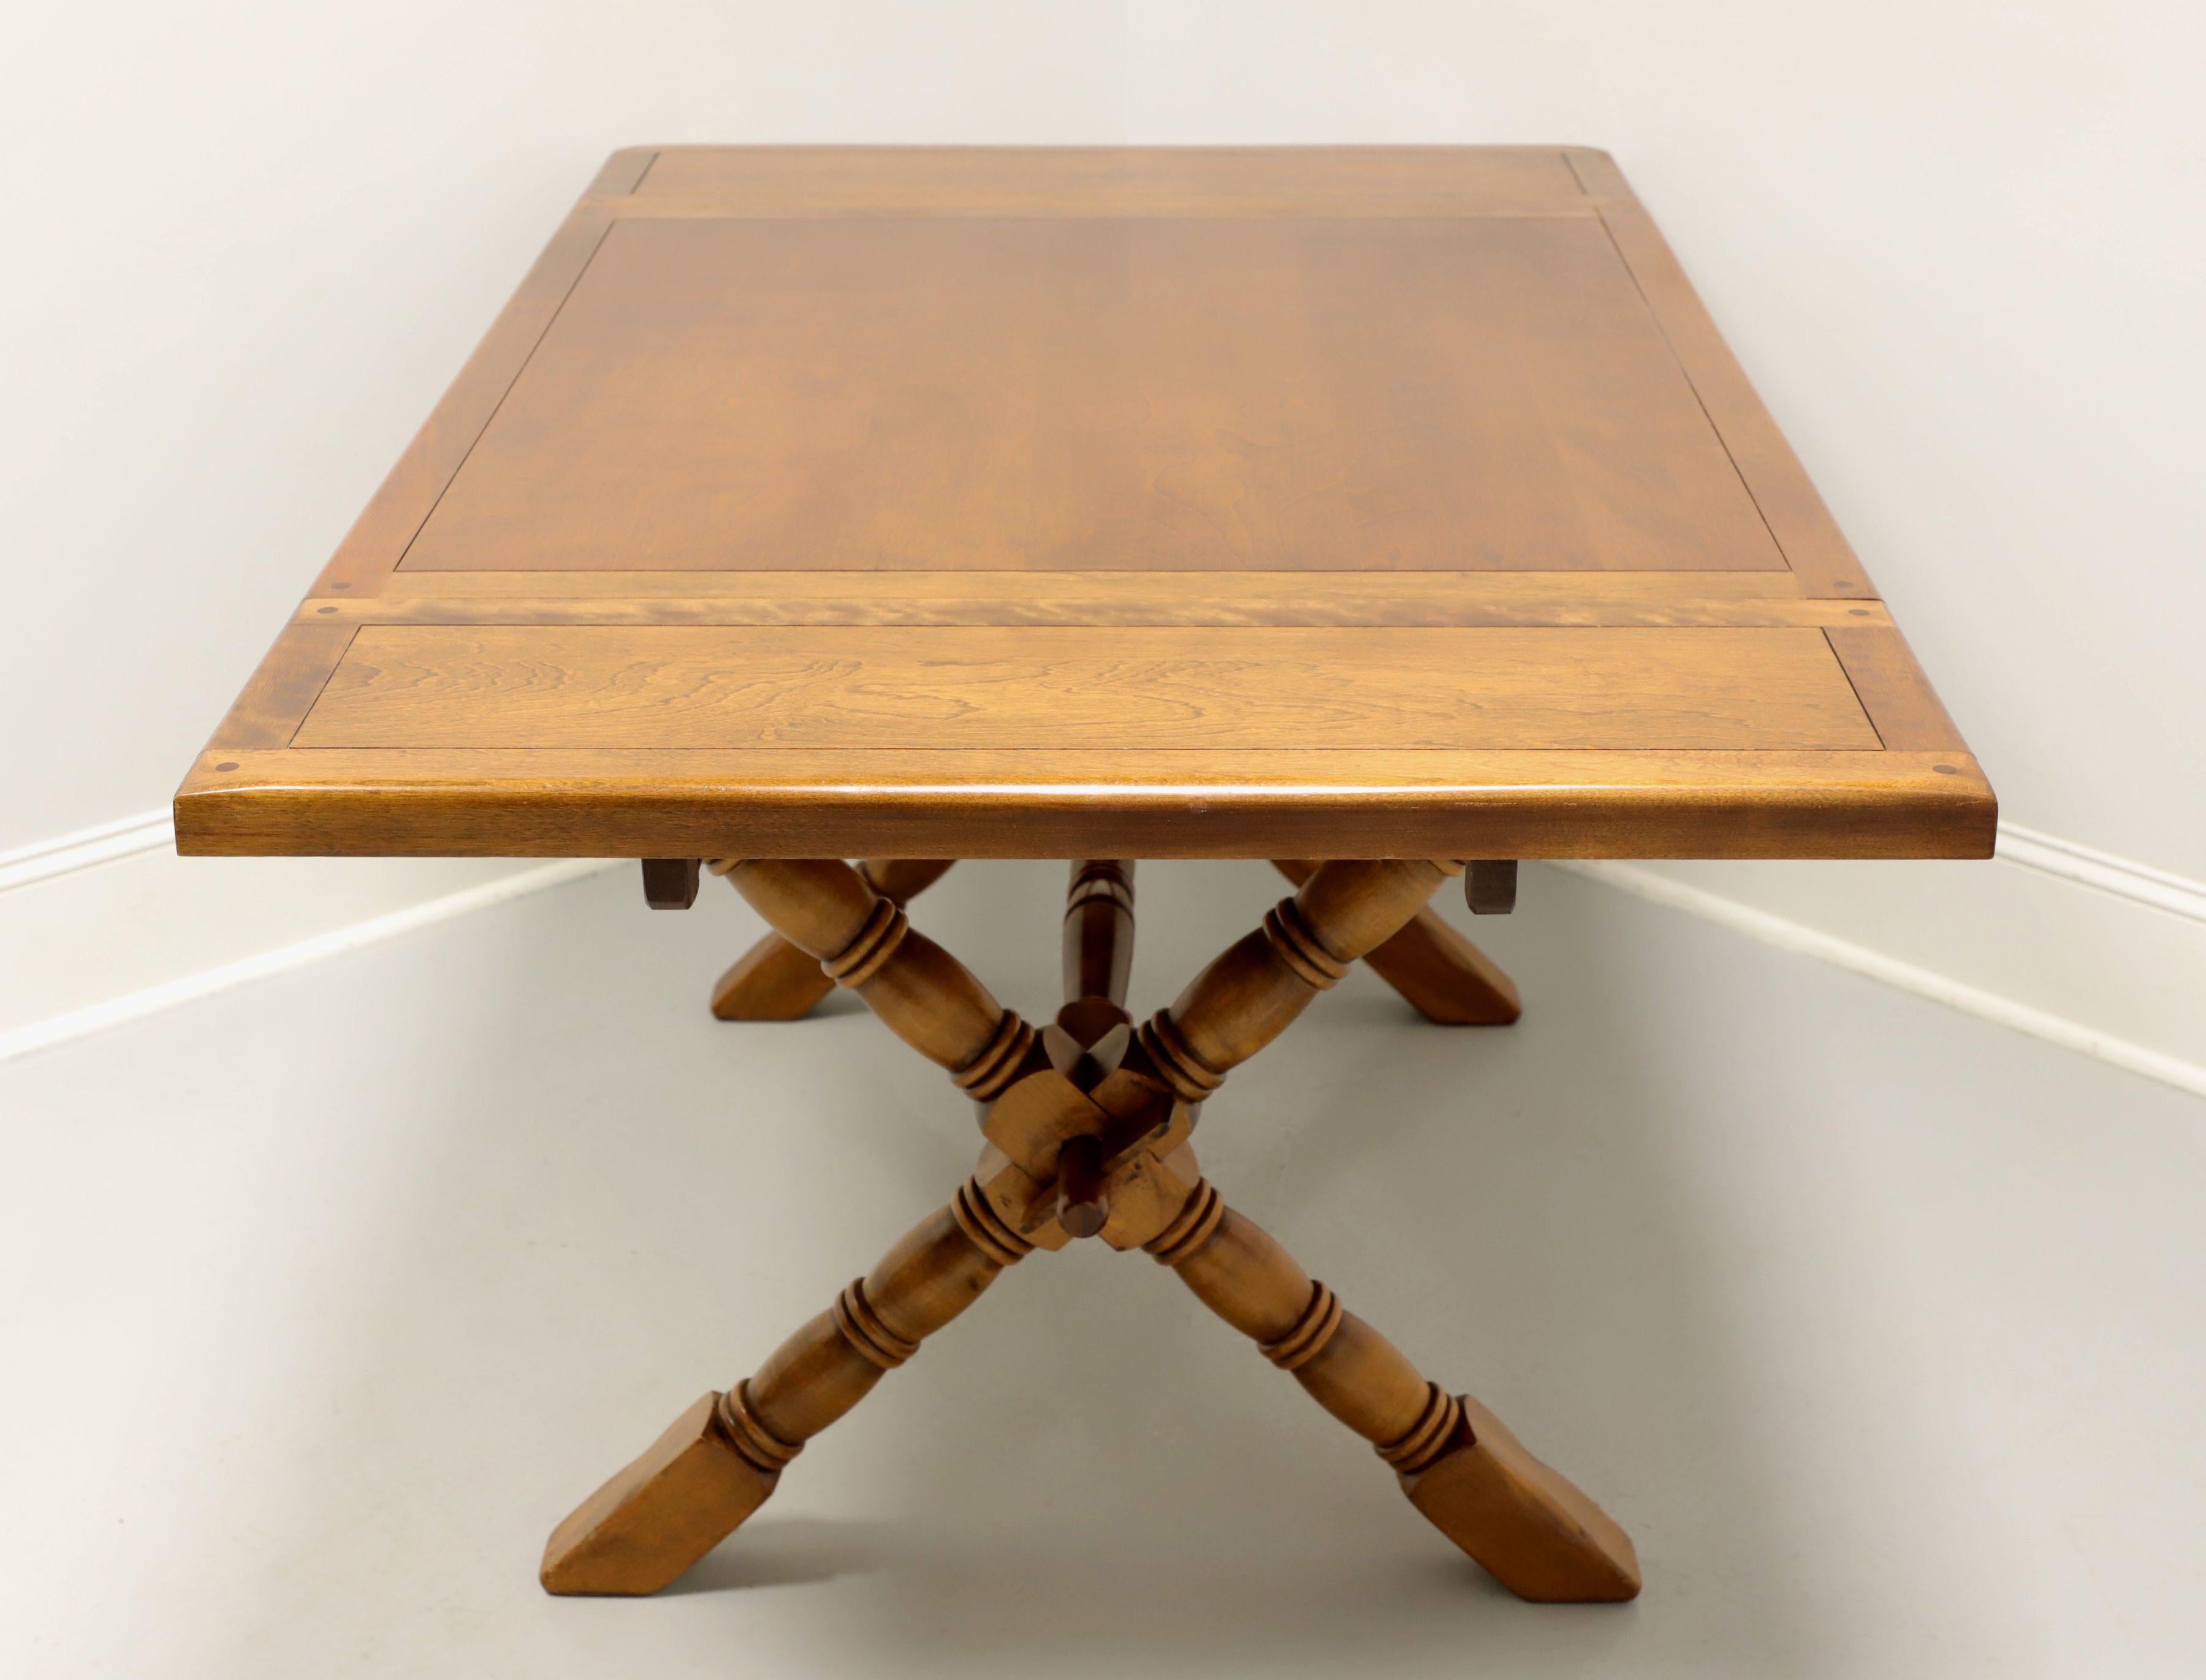 A Farmhouse style dining table by Temple Stuart, their Rockingham. Maple & birch, thick banded top with decorative pegs at corners, solid apron, turned 